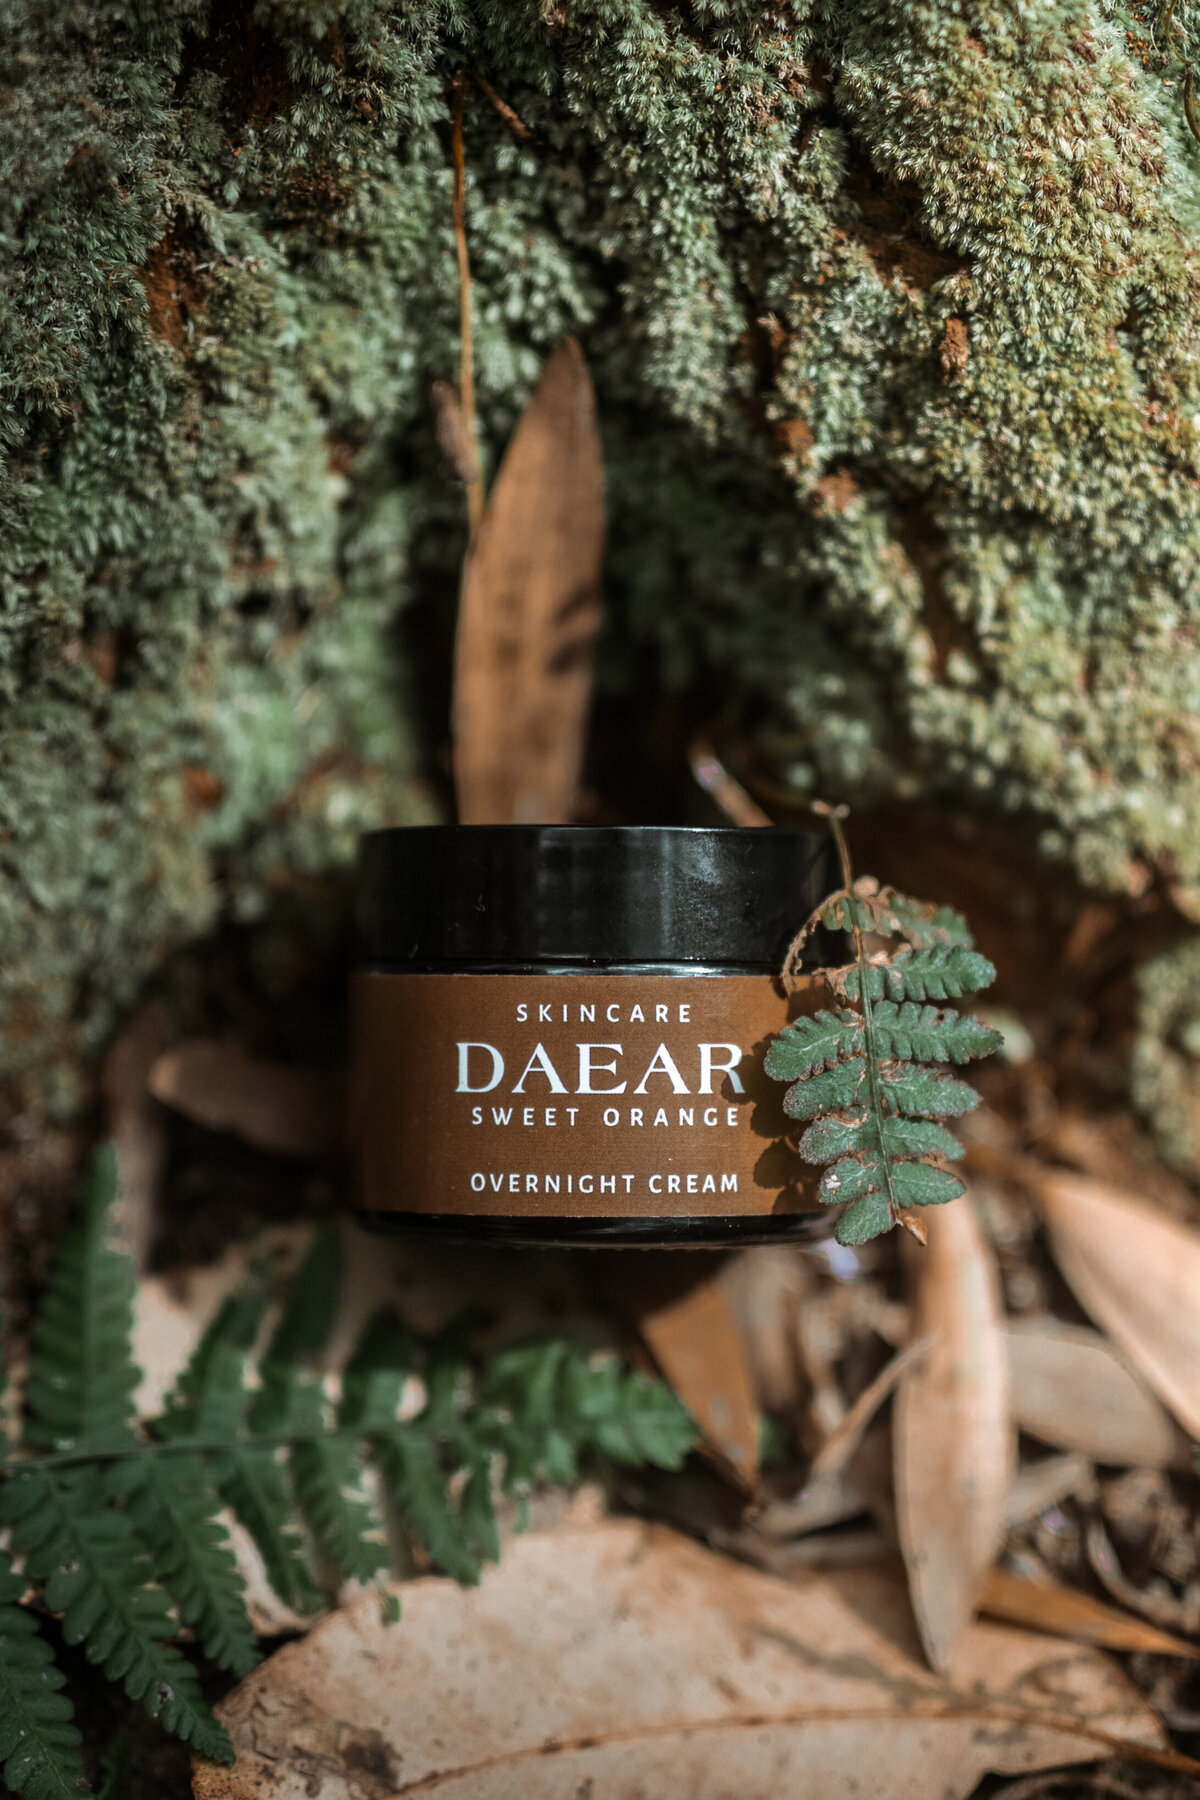 Herbal Skincare Cream positioned among natural greenery